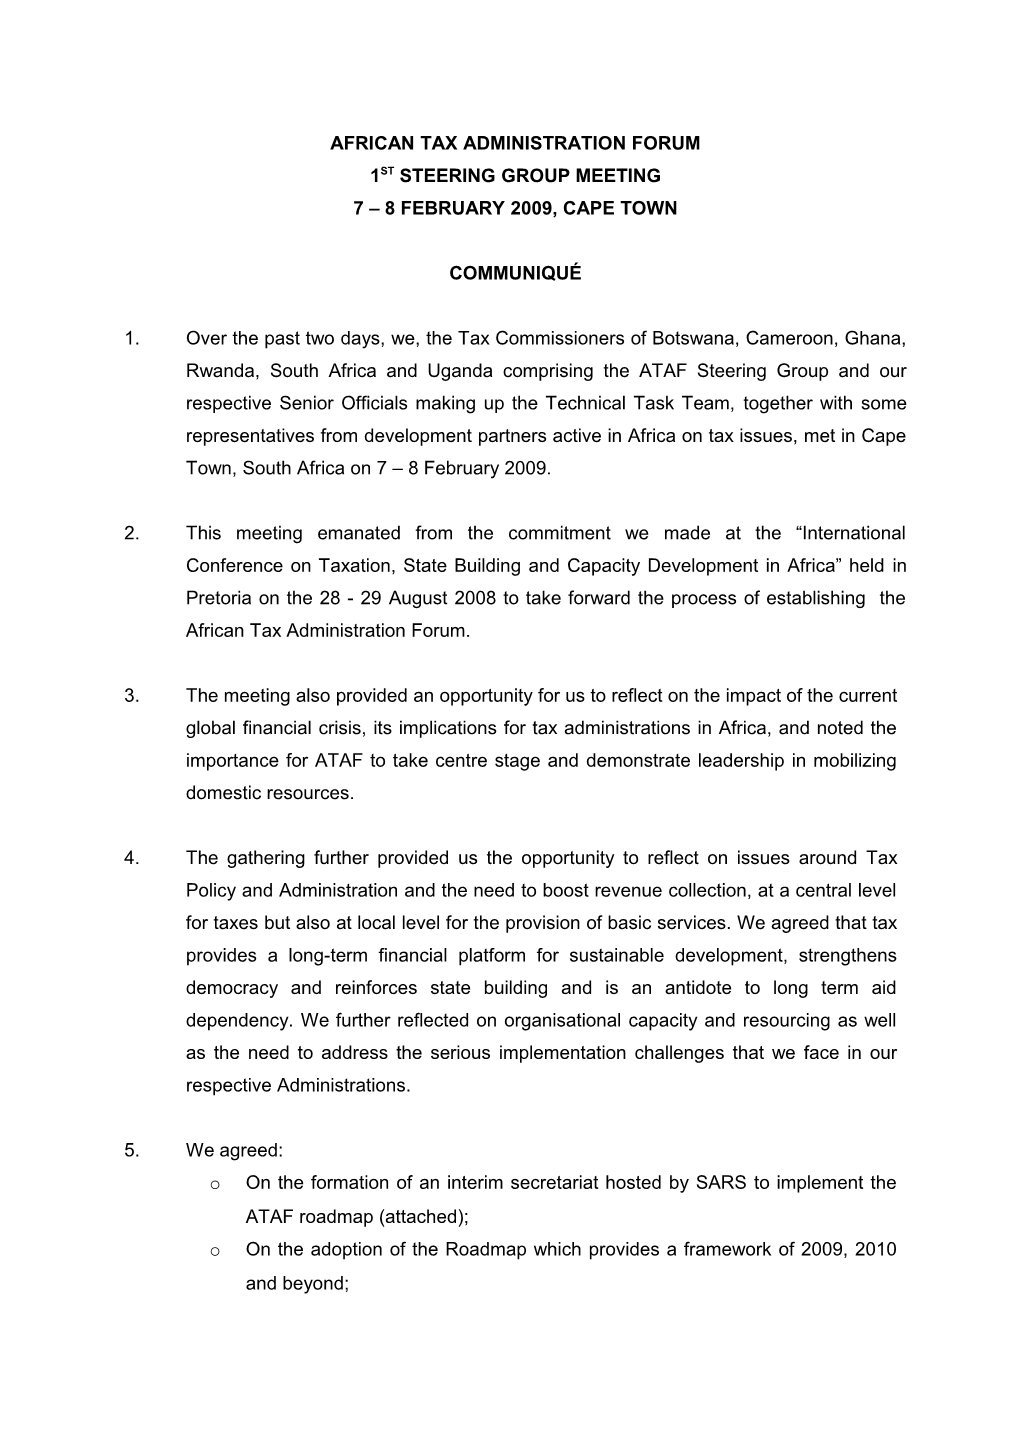 Resolution of the Customs Co-Operation Council